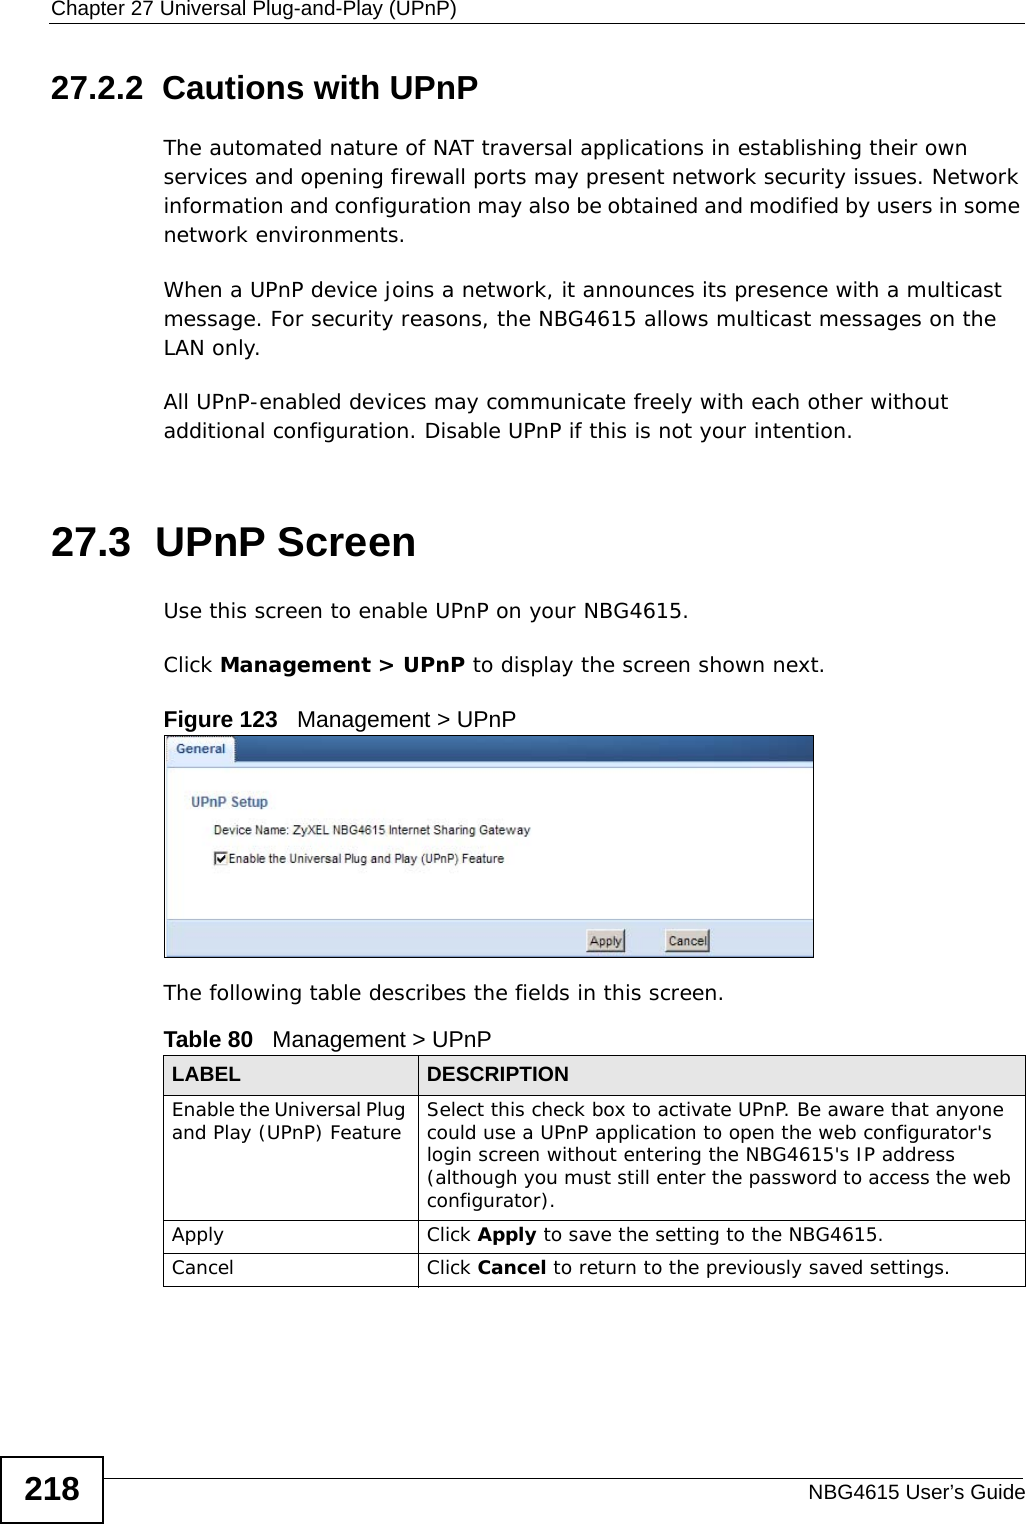 Chapter 27 Universal Plug-and-Play (UPnP)NBG4615 User’s Guide21827.2.2  Cautions with UPnPThe automated nature of NAT traversal applications in establishing their own services and opening firewall ports may present network security issues. Network information and configuration may also be obtained and modified by users in some network environments. When a UPnP device joins a network, it announces its presence with a multicast message. For security reasons, the NBG4615 allows multicast messages on the LAN only.All UPnP-enabled devices may communicate freely with each other without additional configuration. Disable UPnP if this is not your intention. 27.3  UPnP Screen Use this screen to enable UPnP on your NBG4615.Click Management &gt; UPnP to display the screen shown next. Figure 123   Management &gt; UPnPThe following table describes the fields in this screen.Table 80   Management &gt; UPnPLABEL DESCRIPTIONEnable the Universal Plug and Play (UPnP) Feature  Select this check box to activate UPnP. Be aware that anyone could use a UPnP application to open the web configurator&apos;s login screen without entering the NBG4615&apos;s IP address (although you must still enter the password to access the web configurator).Apply Click Apply to save the setting to the NBG4615.Cancel Click Cancel to return to the previously saved settings.